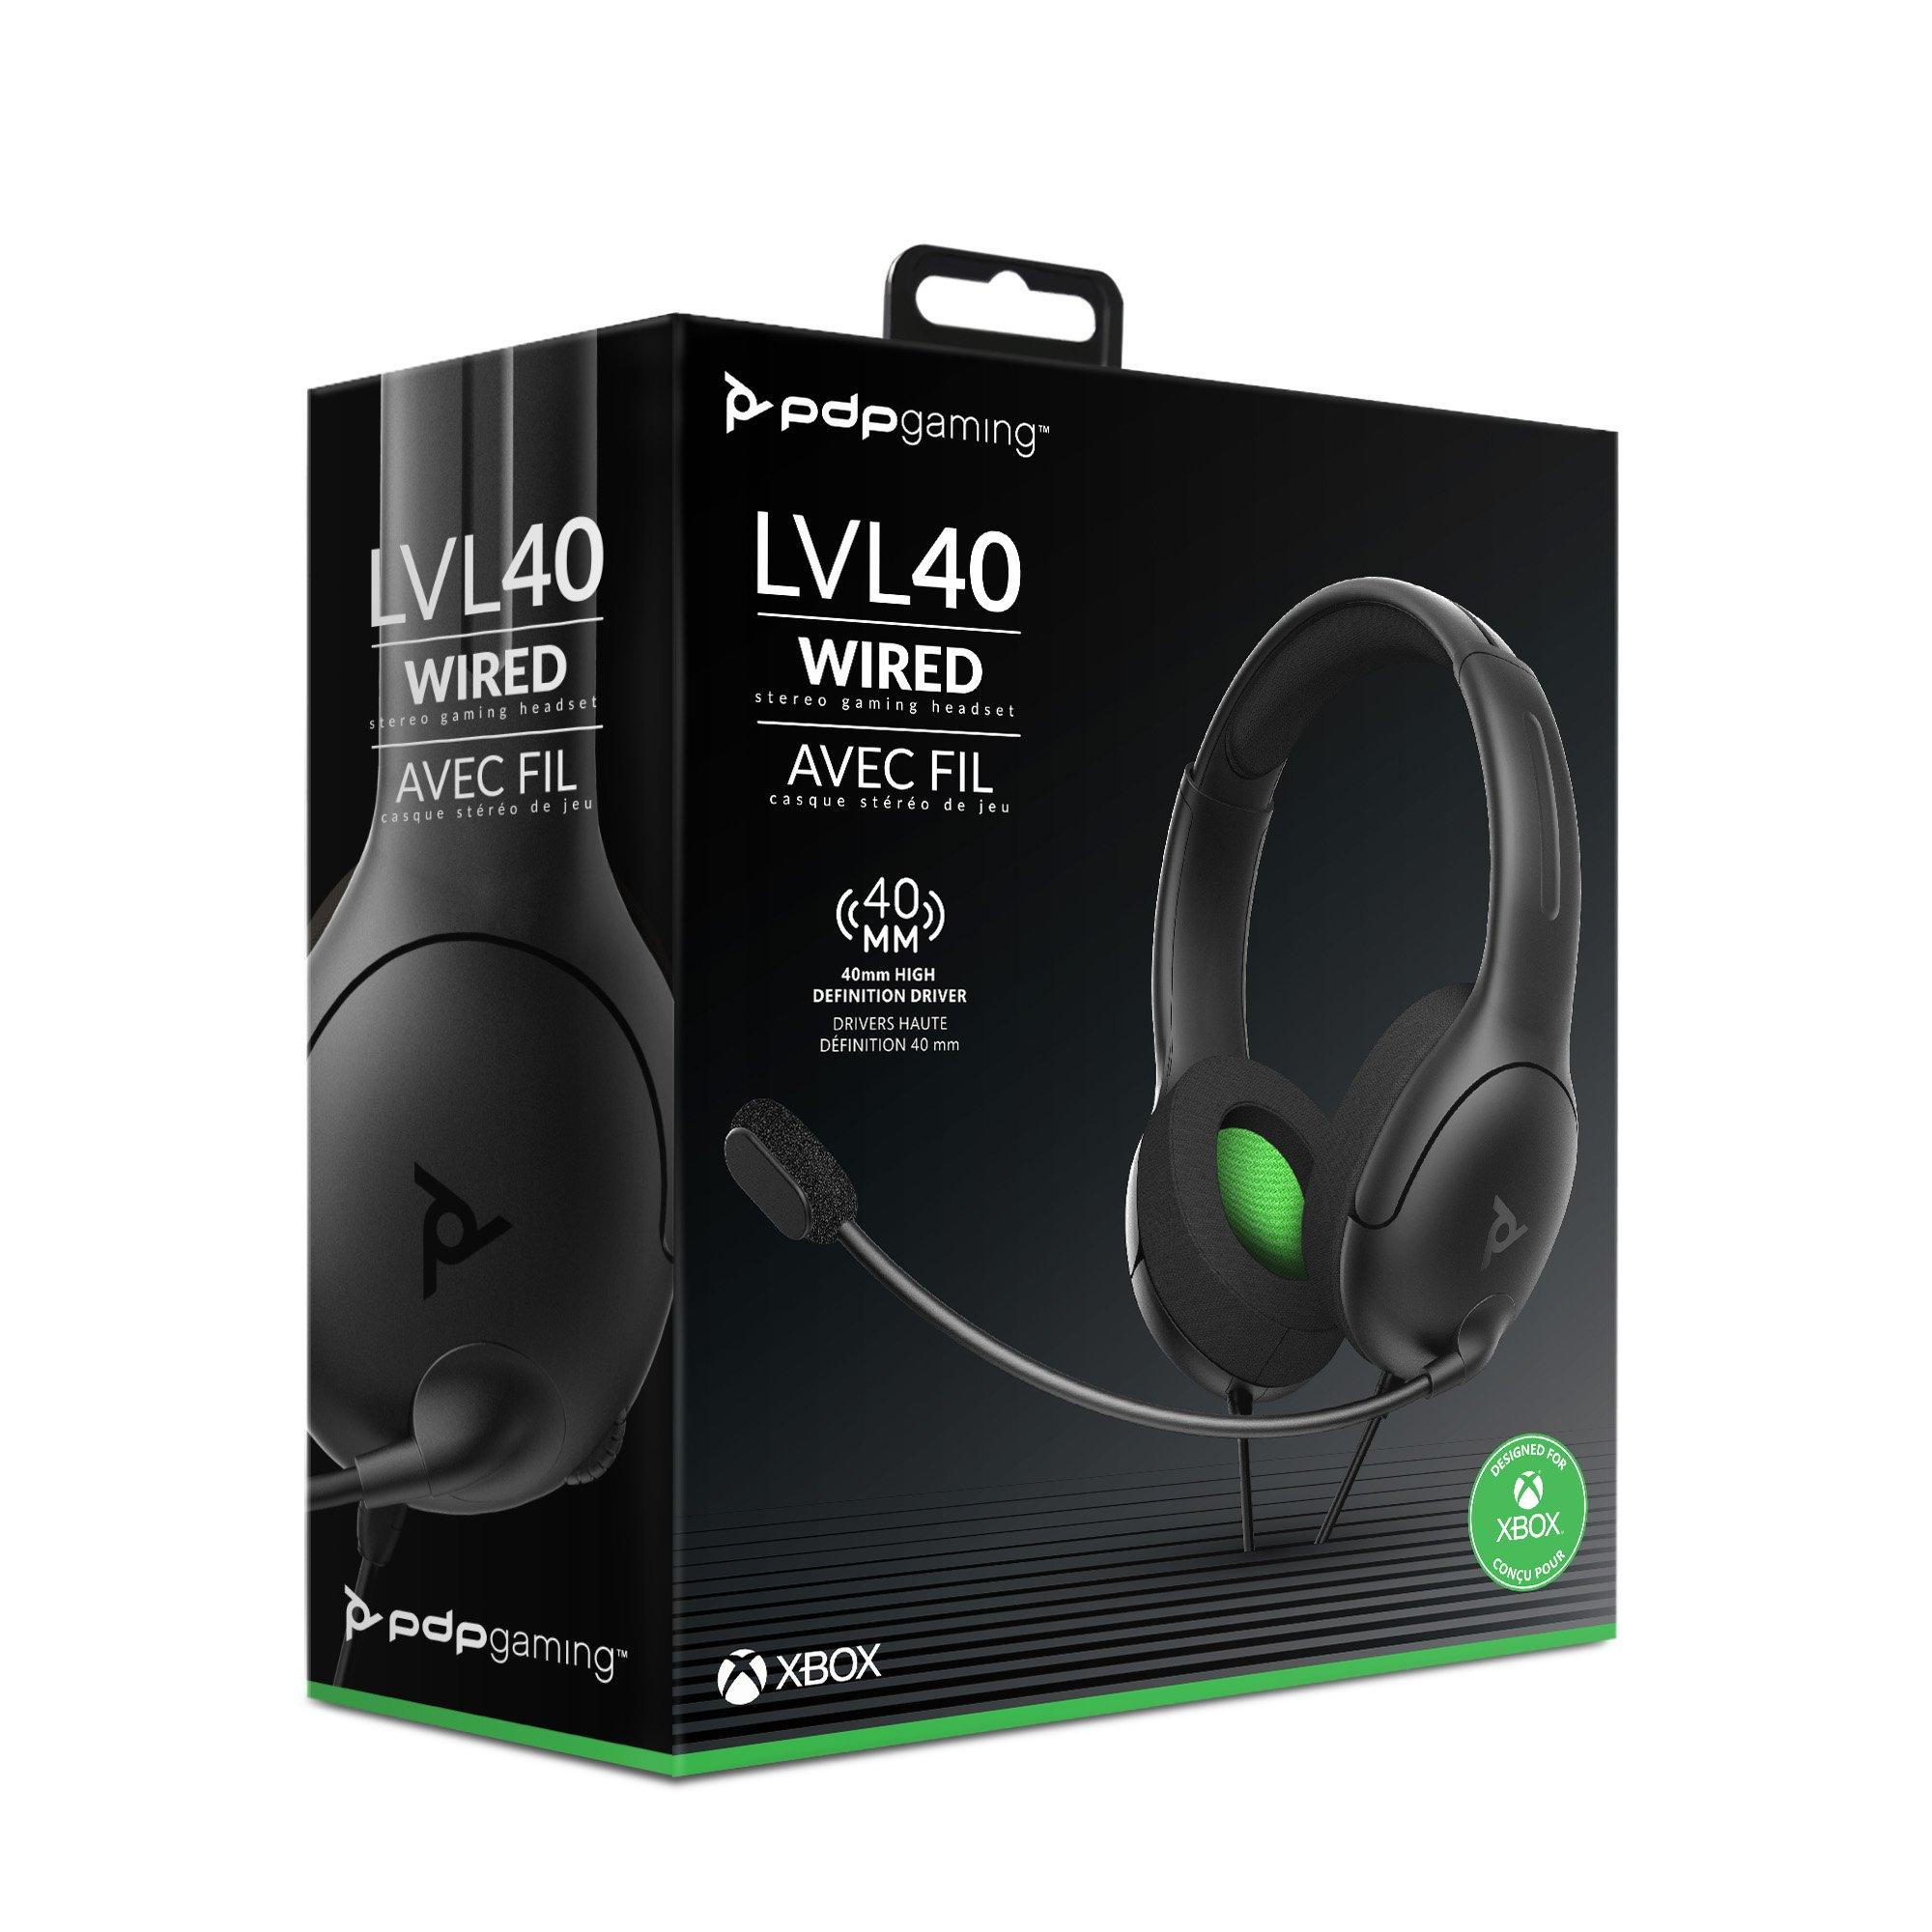 PDP Gaming LvL40 Wired Stereo Gaming Headset for Xbox One Review